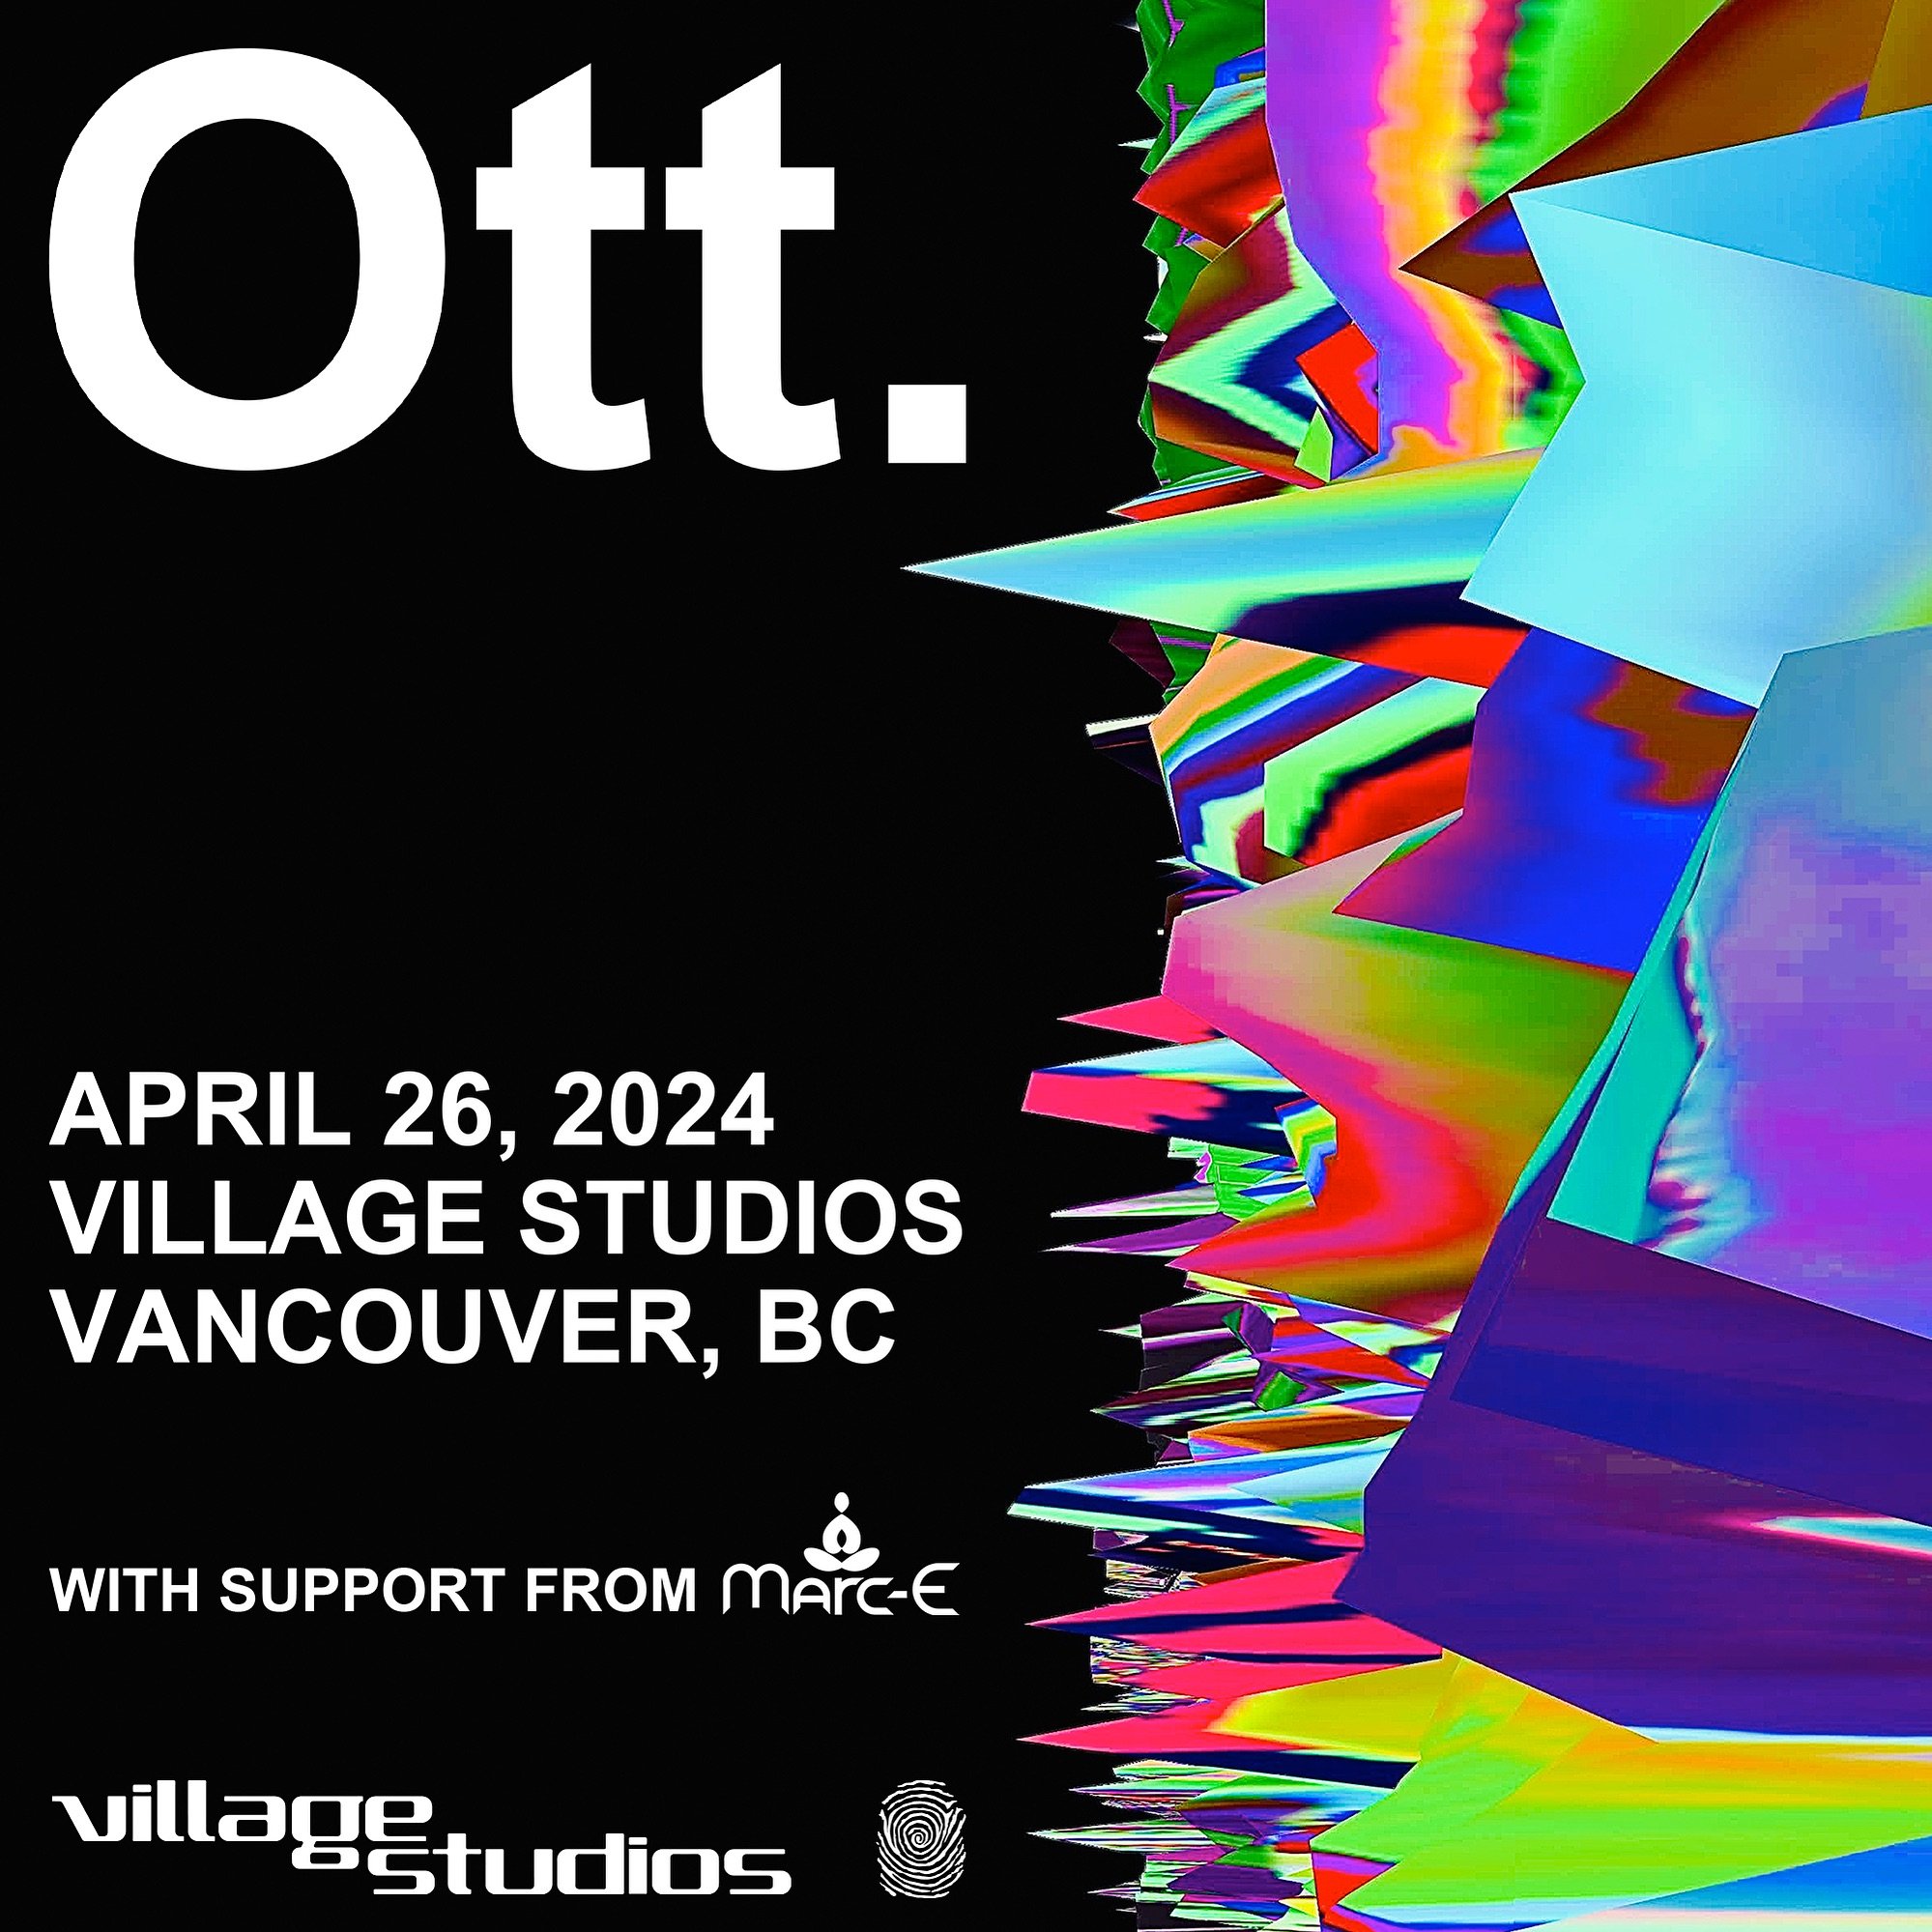 Really excited for this show! 
Friday at Village studios, please come out! 
Ott has been a huge influence on my music over the years, it&rsquo;s a huge honour to be opening the night 🙏
@ottsonic .
.
.
.
.
#ott #psychill #psydub #psybient #vancouverm